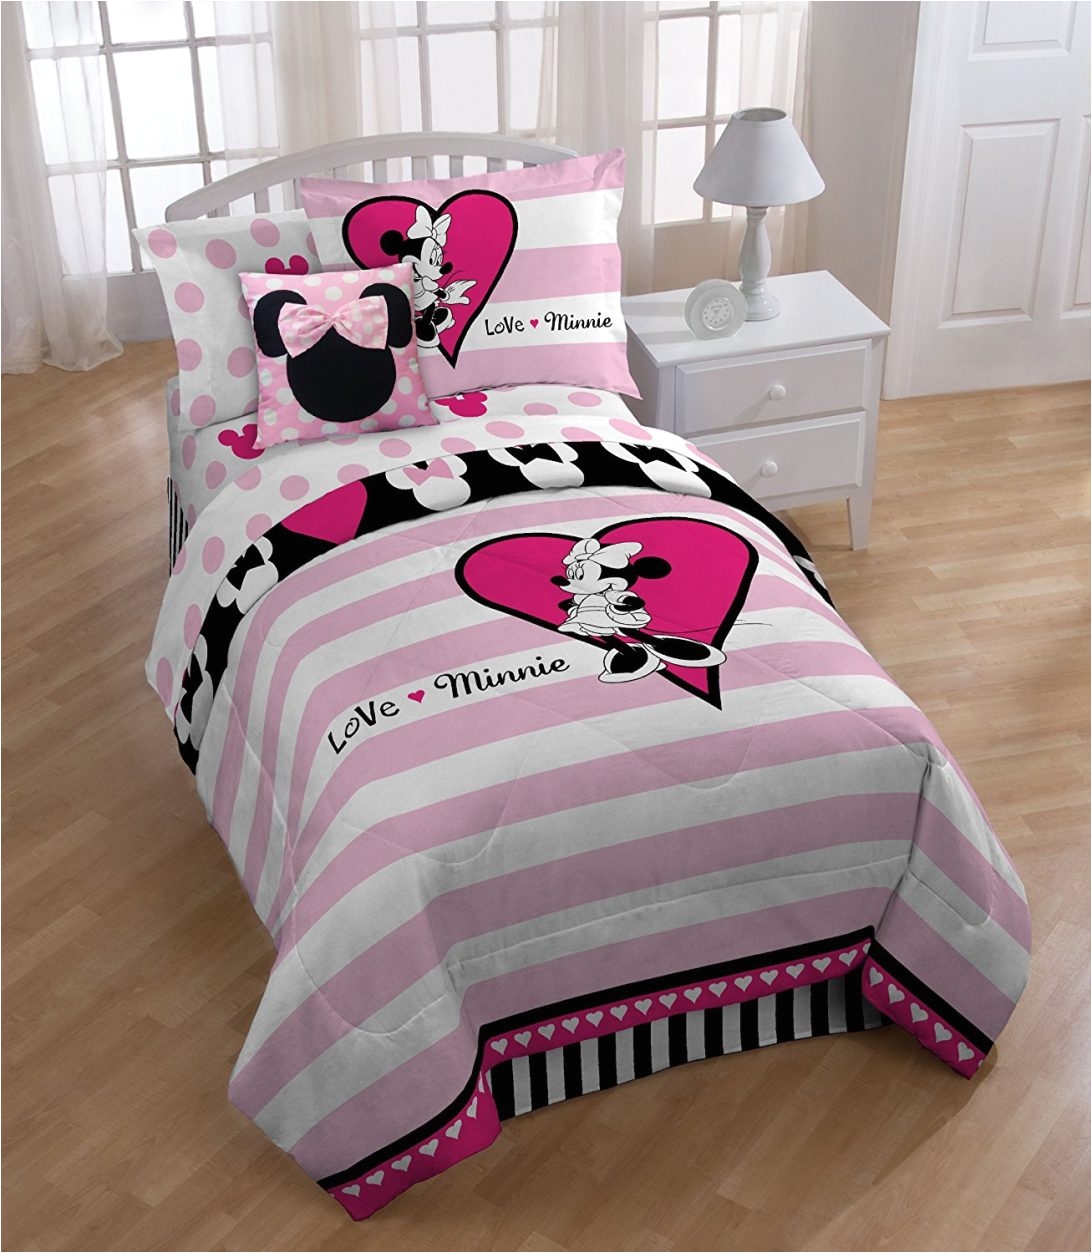 large size of twin bed sheets simplified twin bed bedding sets cute minnie mouse set ideas